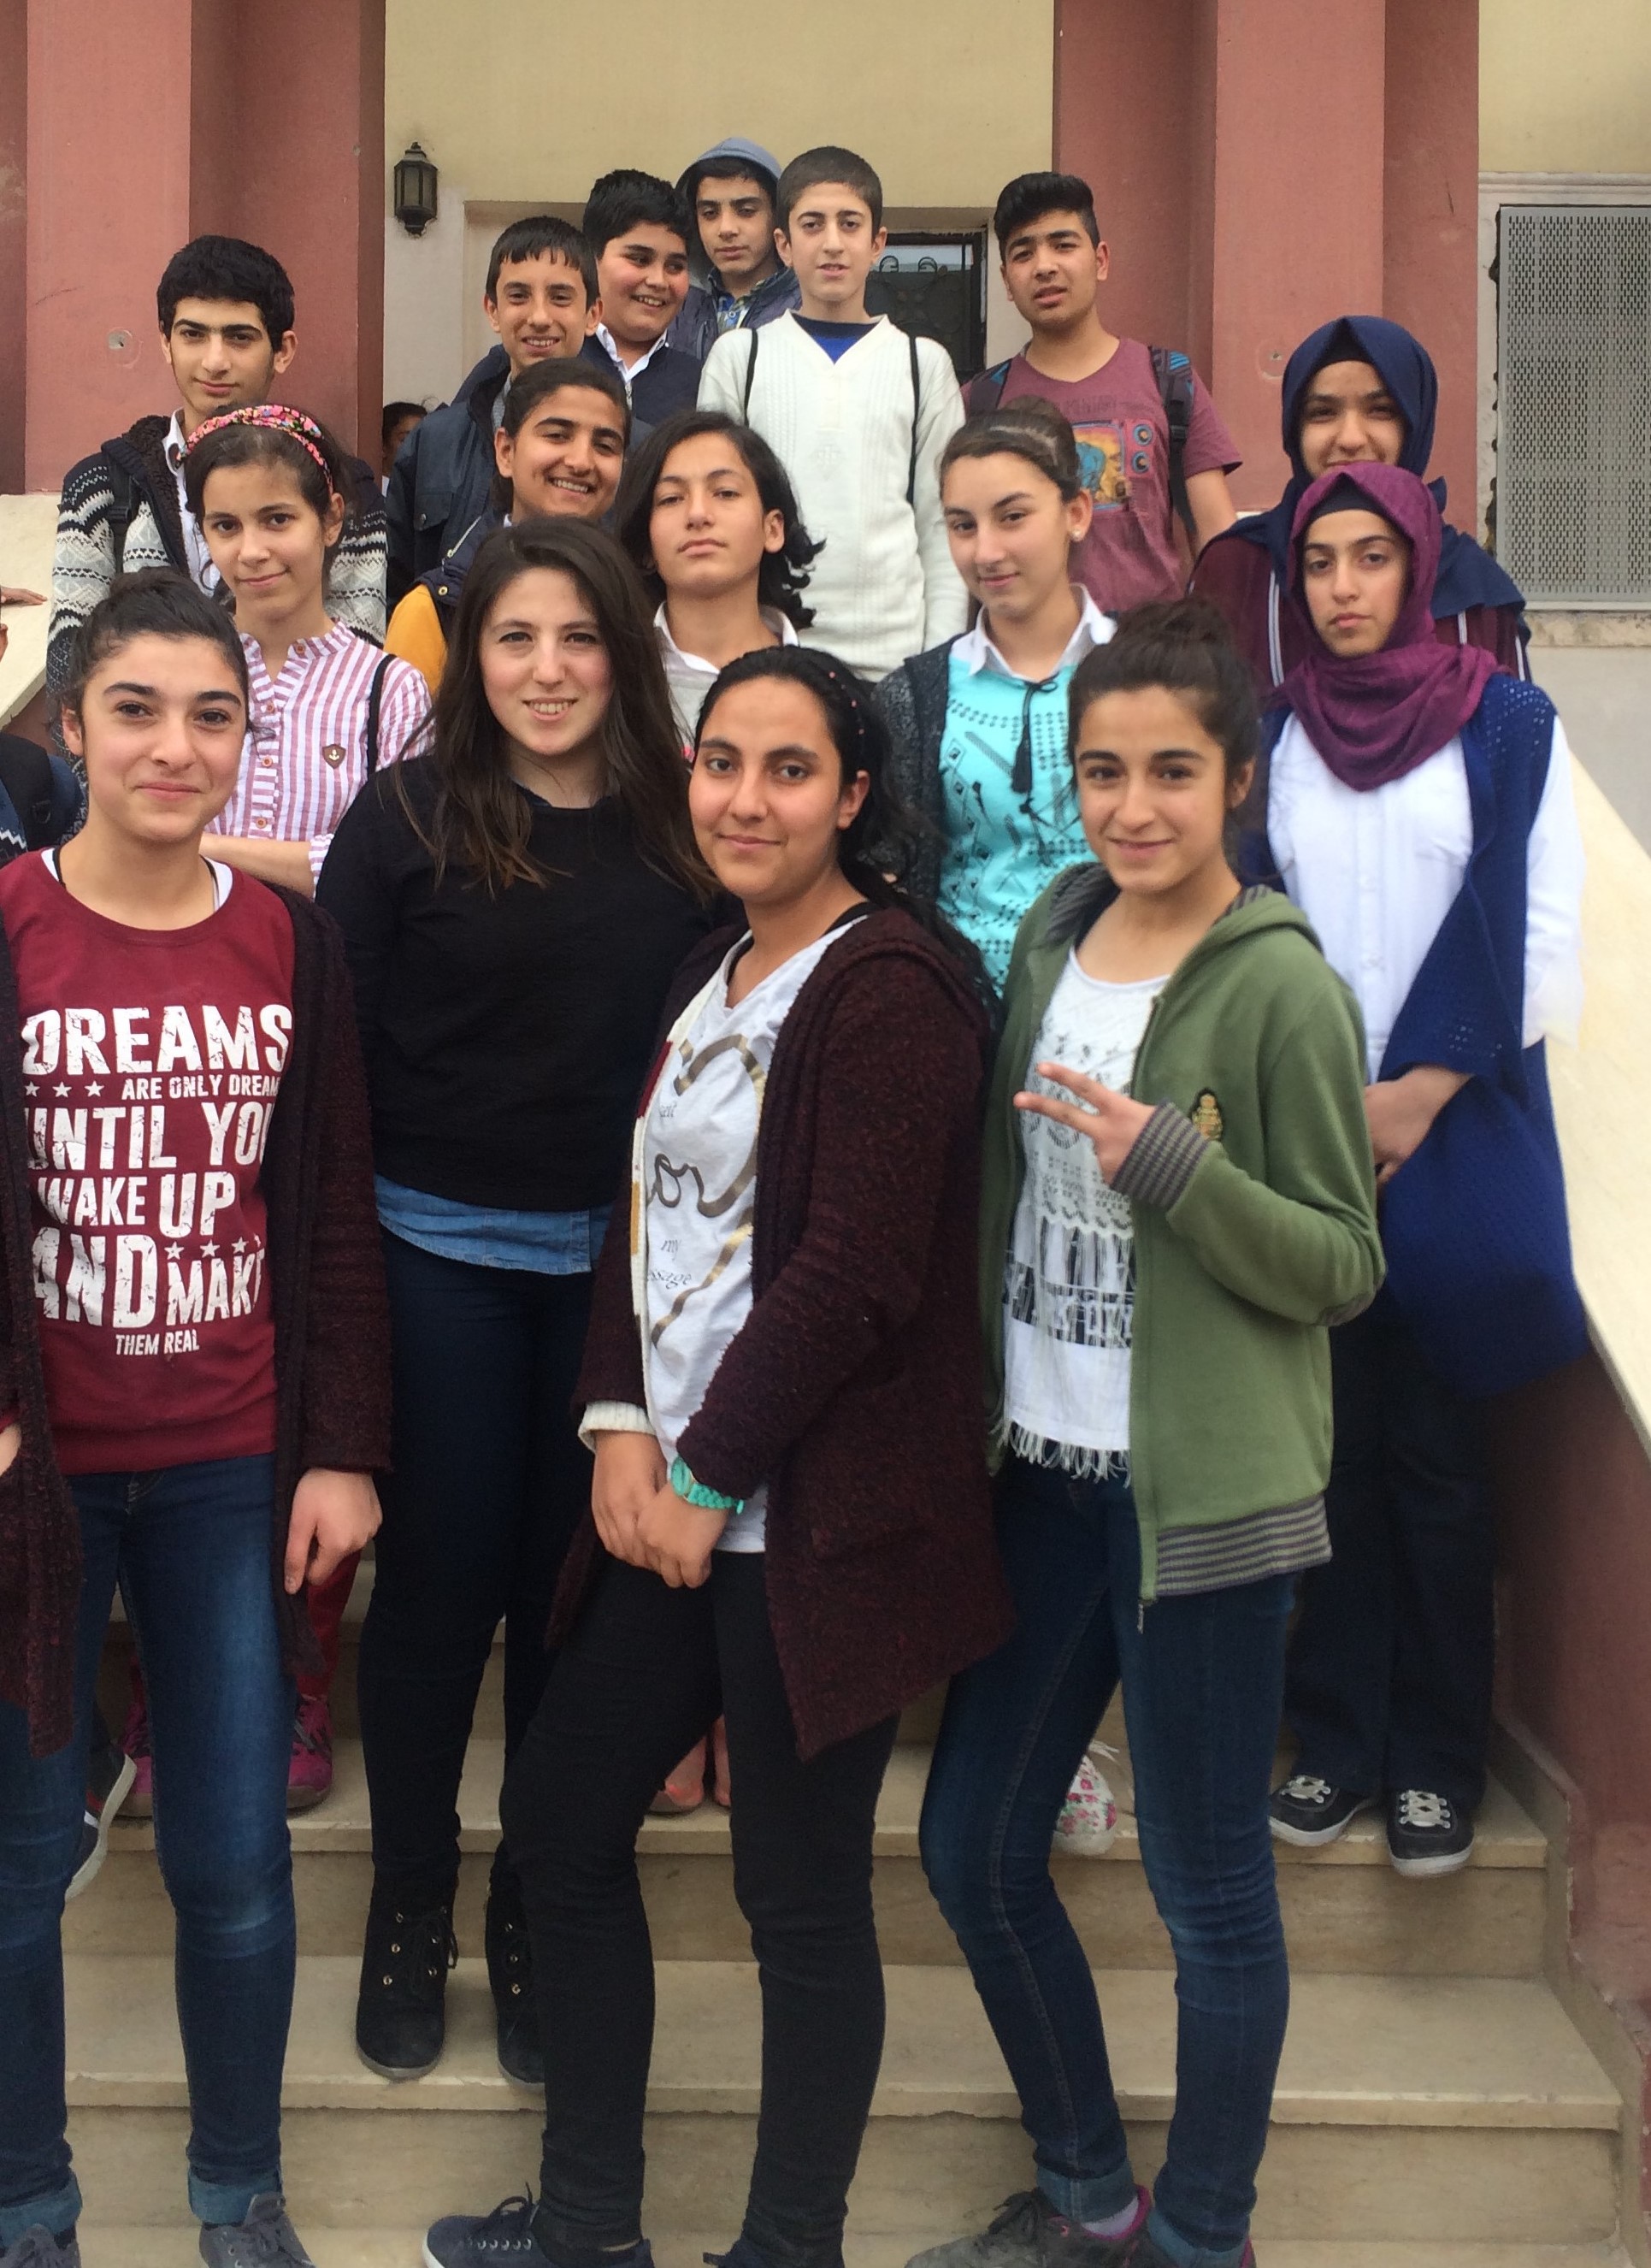 Hi from Gaziantep/Turkey. These are my 8th grade students. We are happy to join to you.